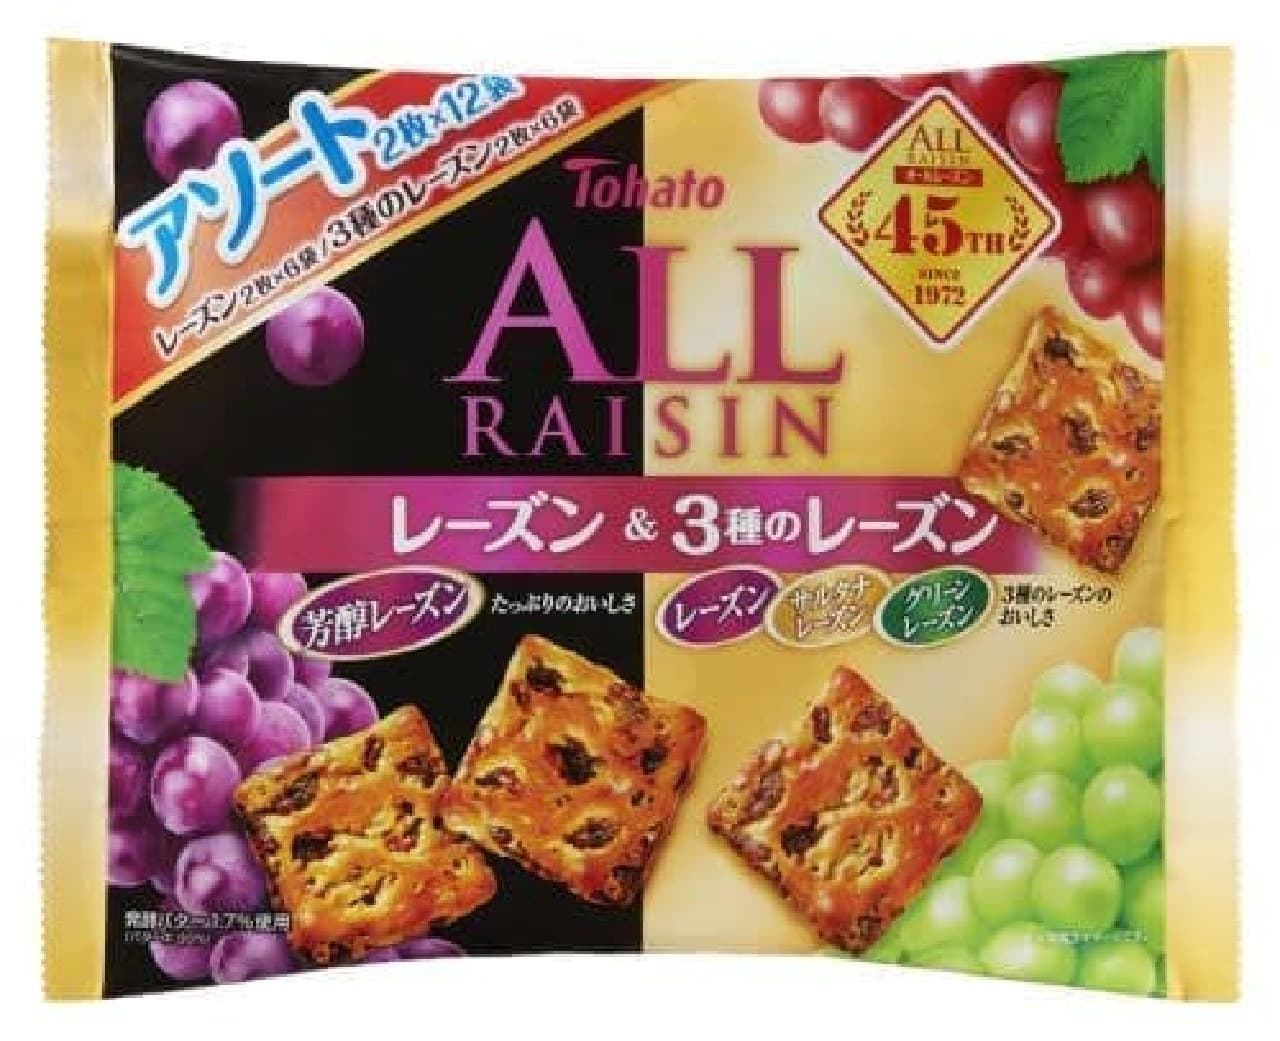 "Family size all-assorted raisins & 3 types of raisins" is a limited assorted pack of 2 types of all-raisins